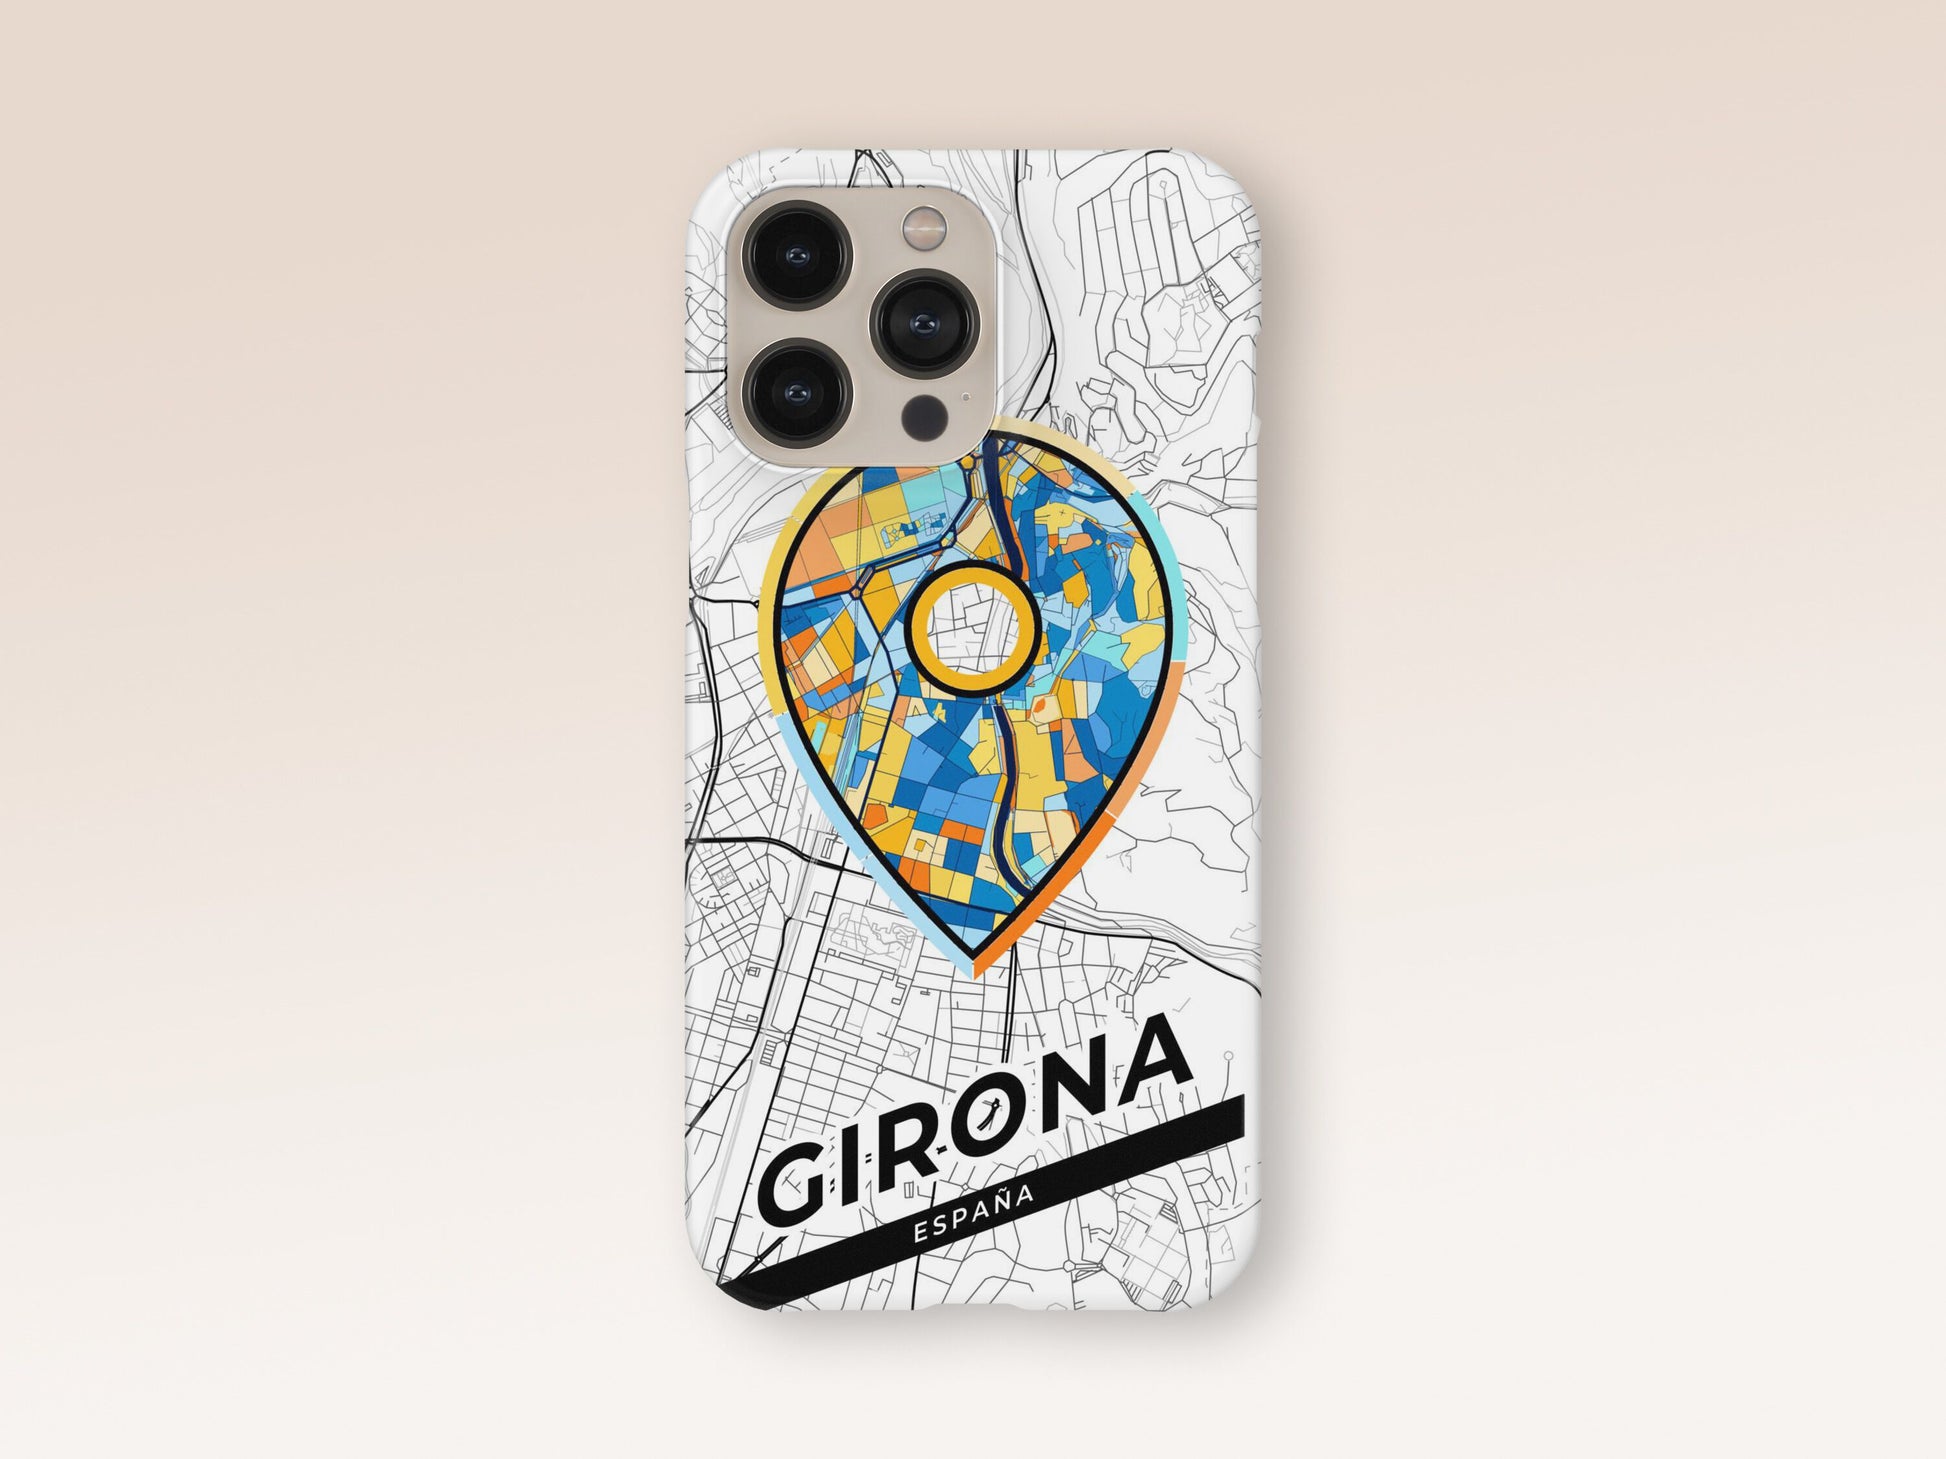 Girona Spain slim phone case with colorful icon. Birthday, wedding or housewarming gift. Couple match cases. 1